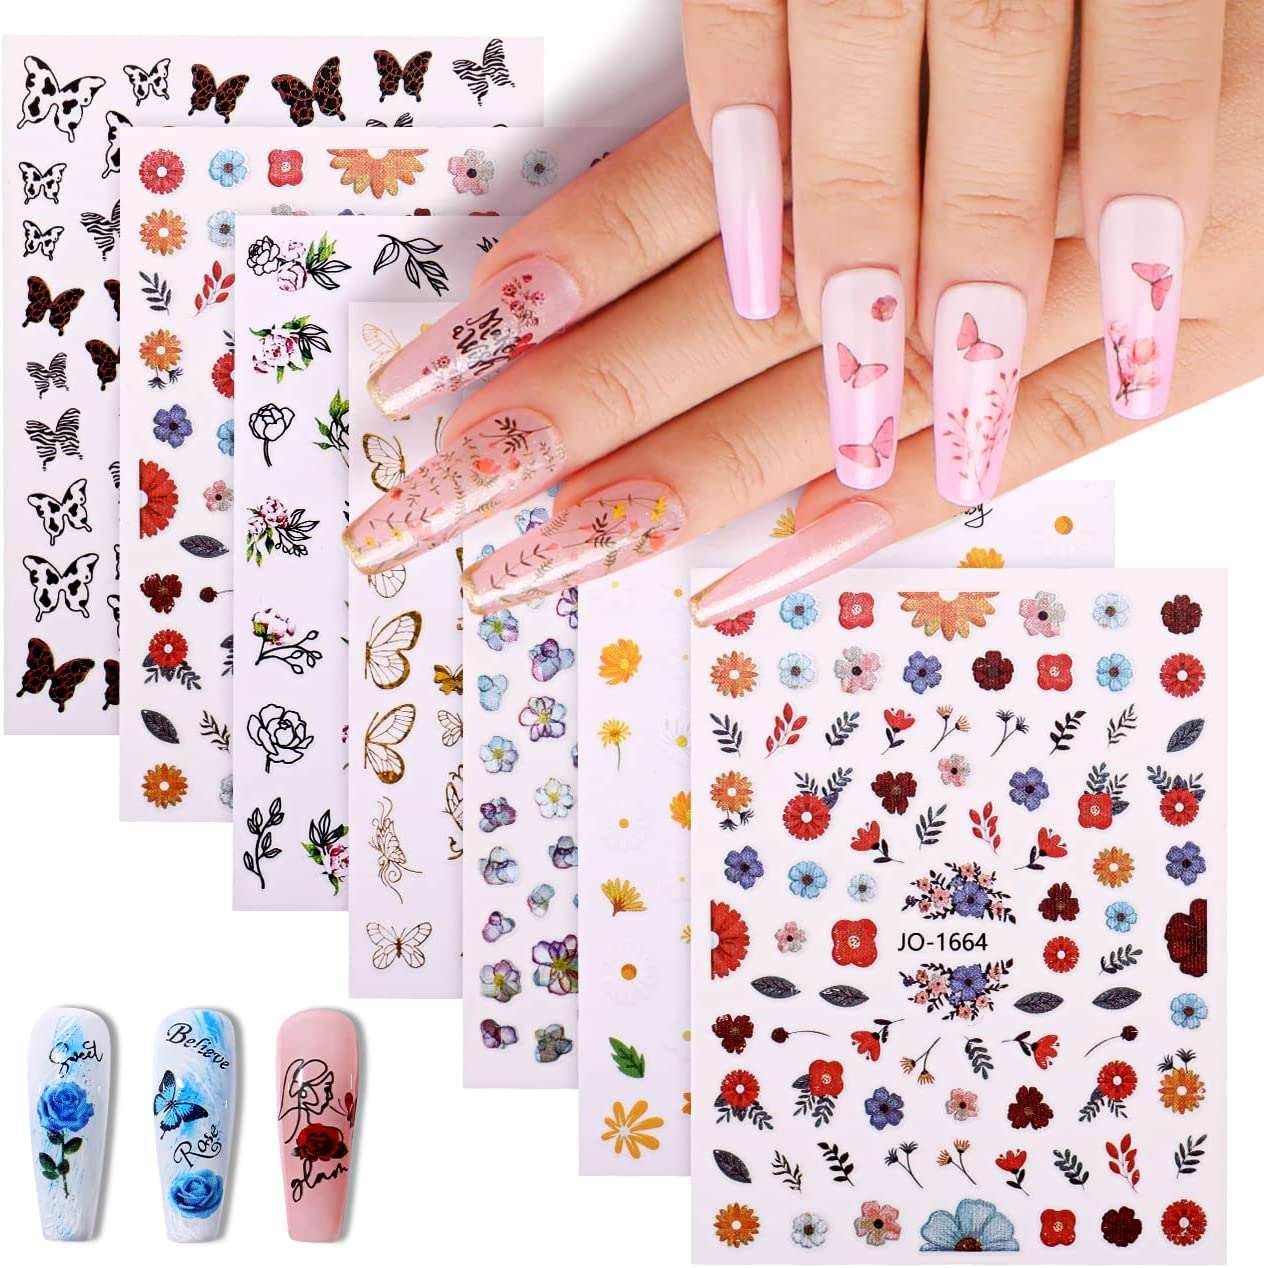 Nail Stickers || The best nail art stickers on the market! Tagged 